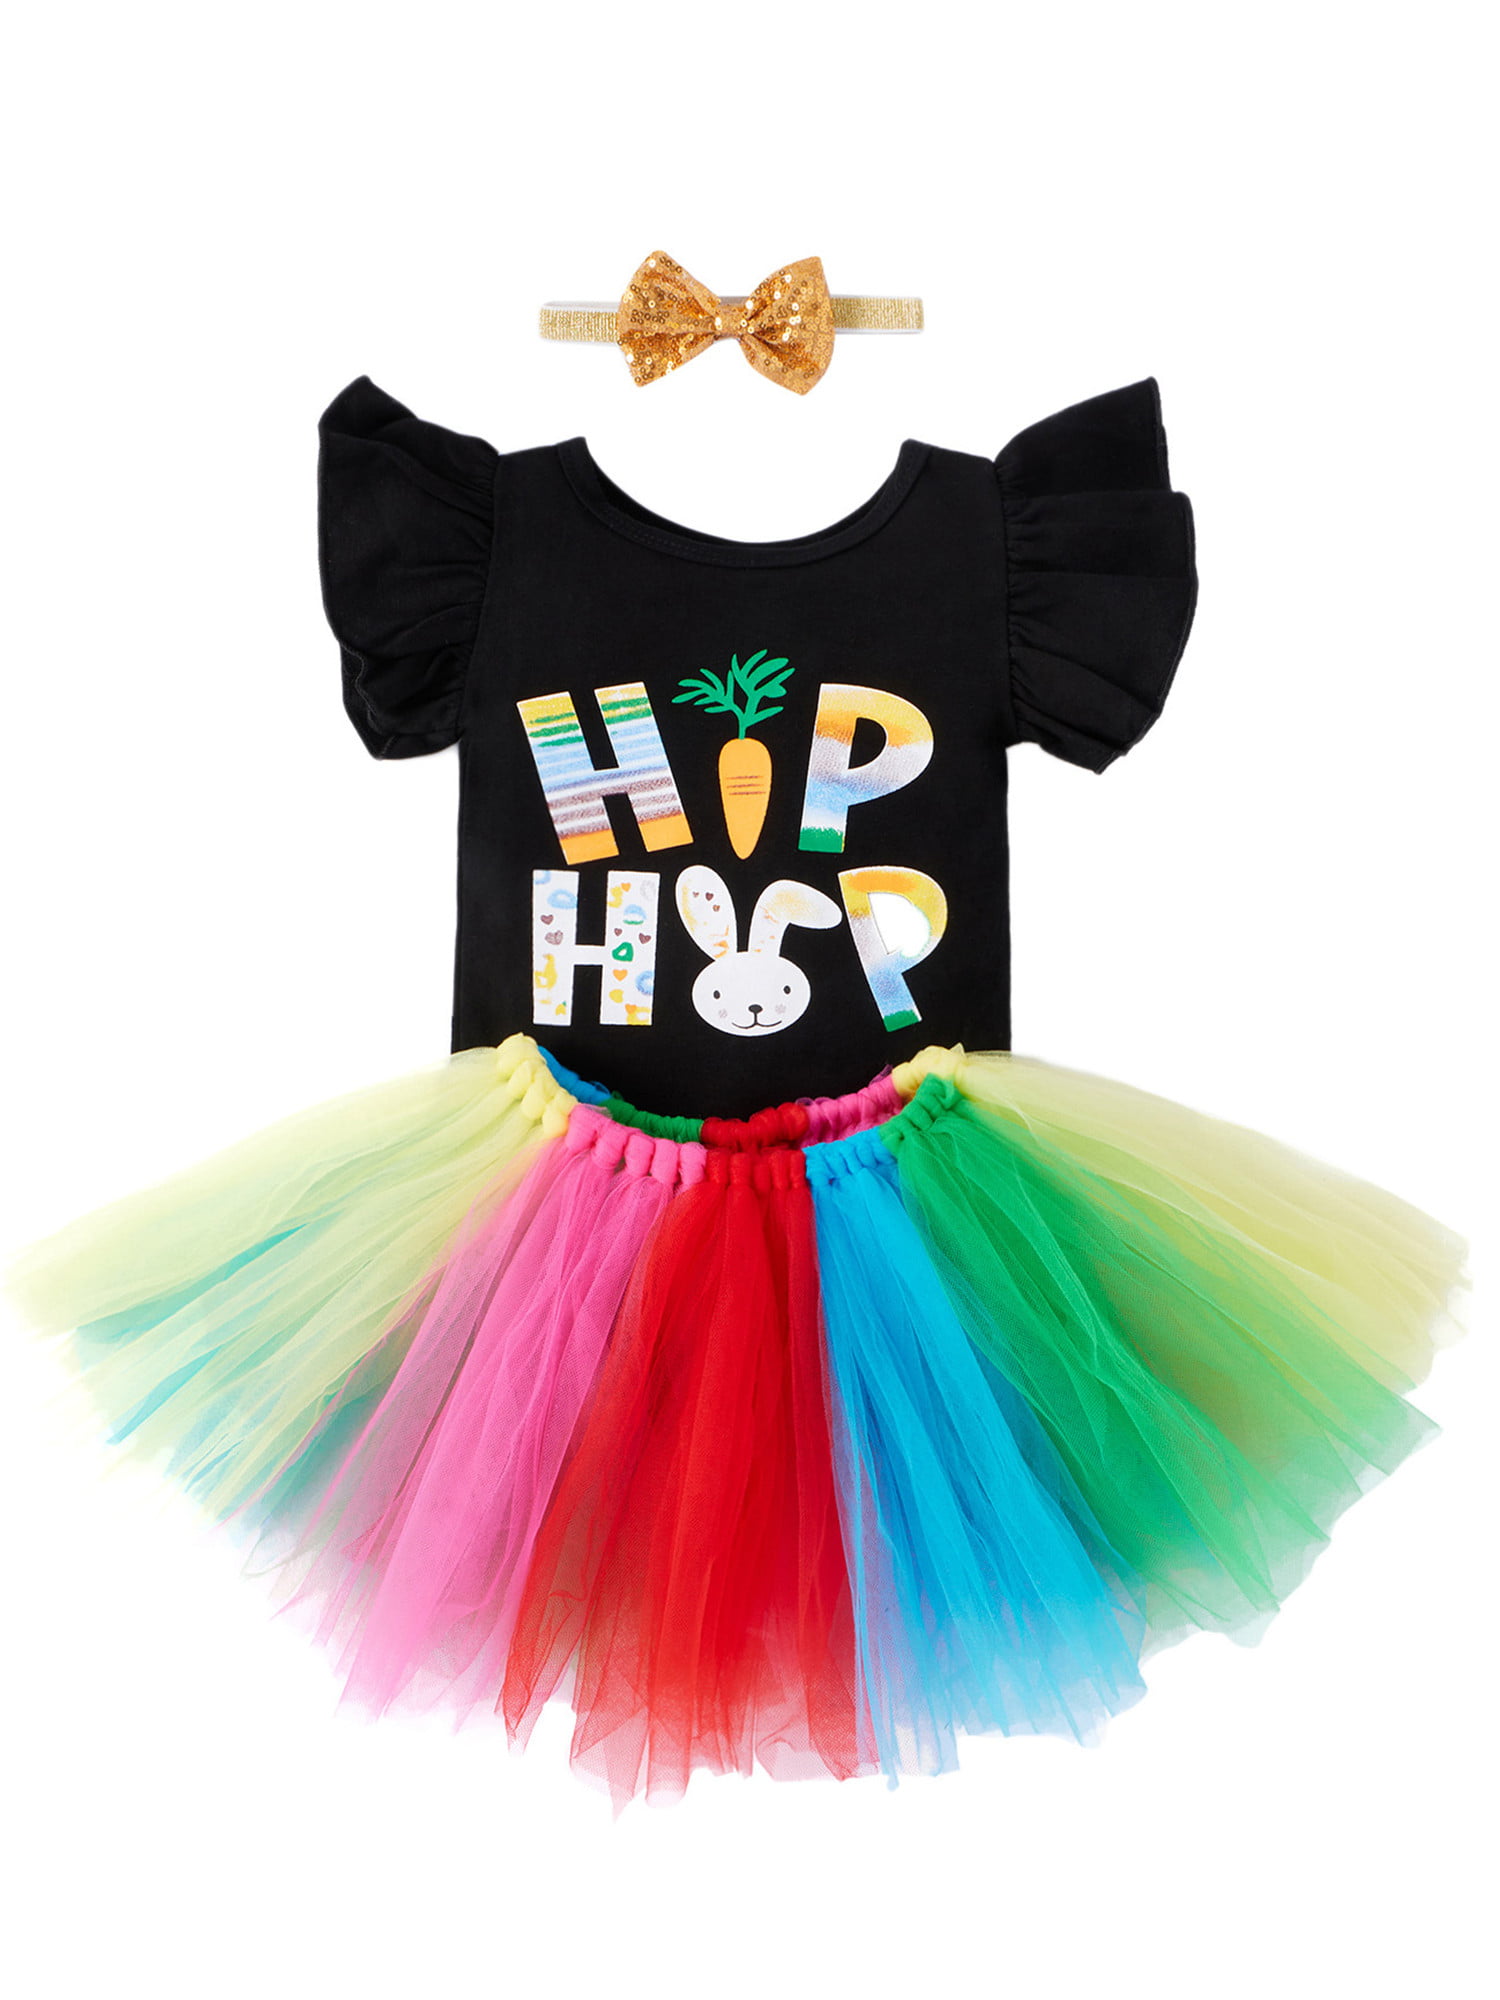 Baby Girl Easter Outfits Toddler Girls Tulle Skirt Short Sleeve Rabbit Romper Tops Lace Tutu Skirt Outfit